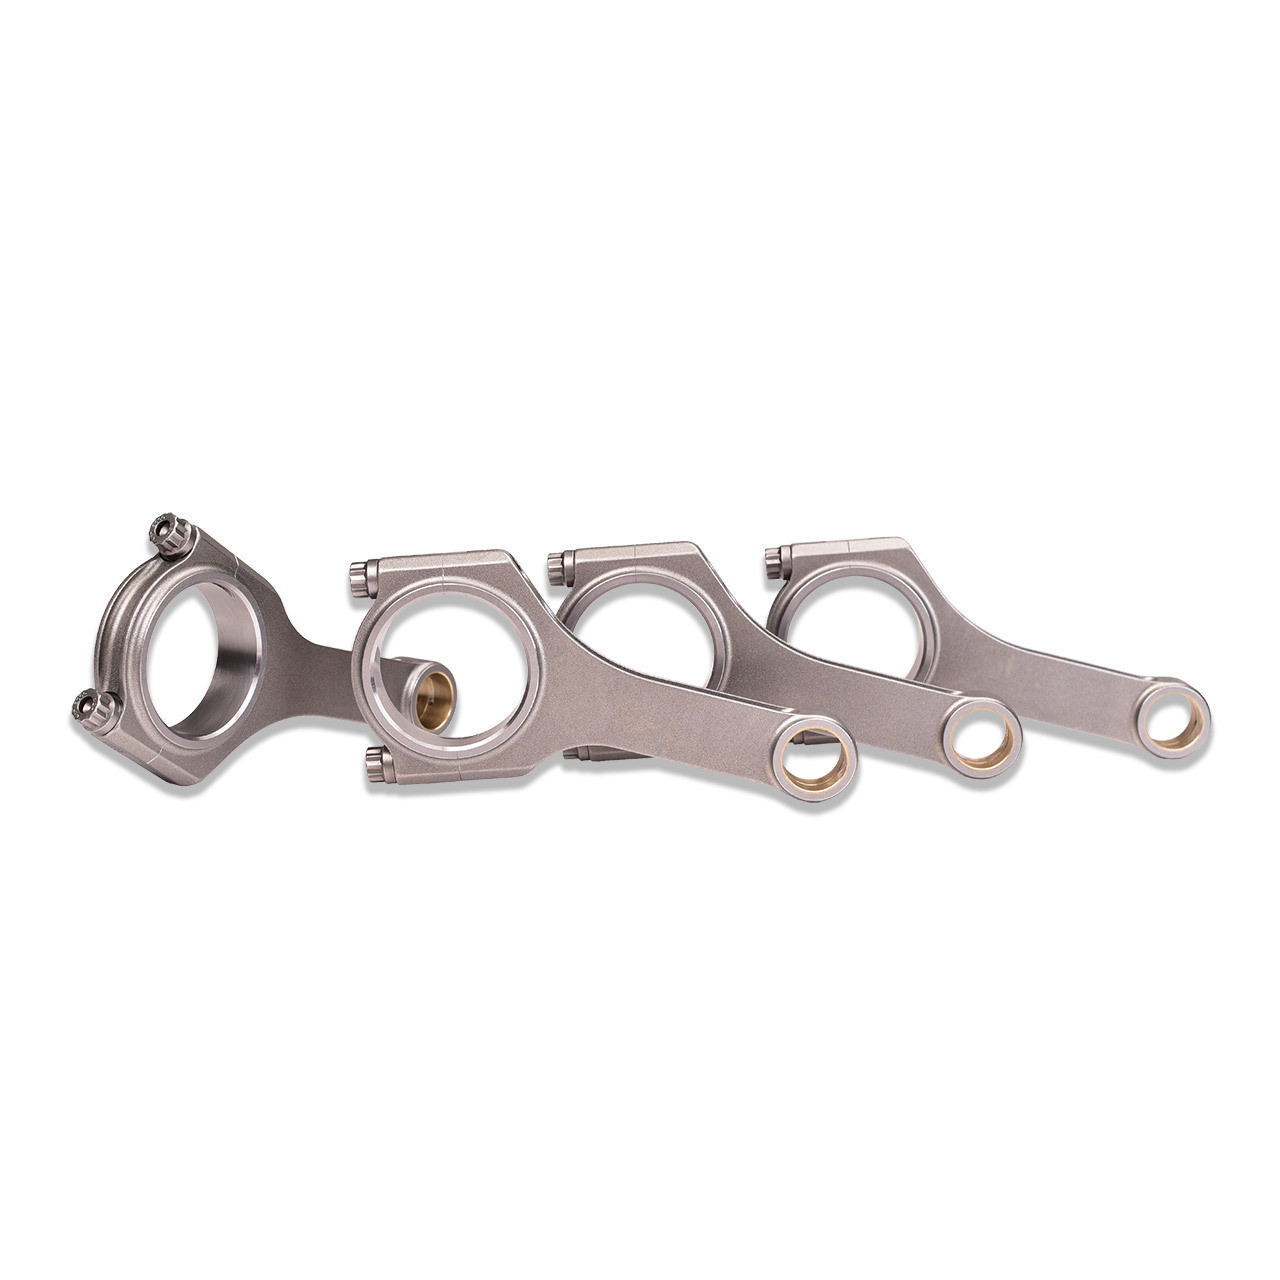 IAG 600 FA20 12.5:1 Compression Ration Short Block Connecting Rods For 2013-20 BRZ / FR-S